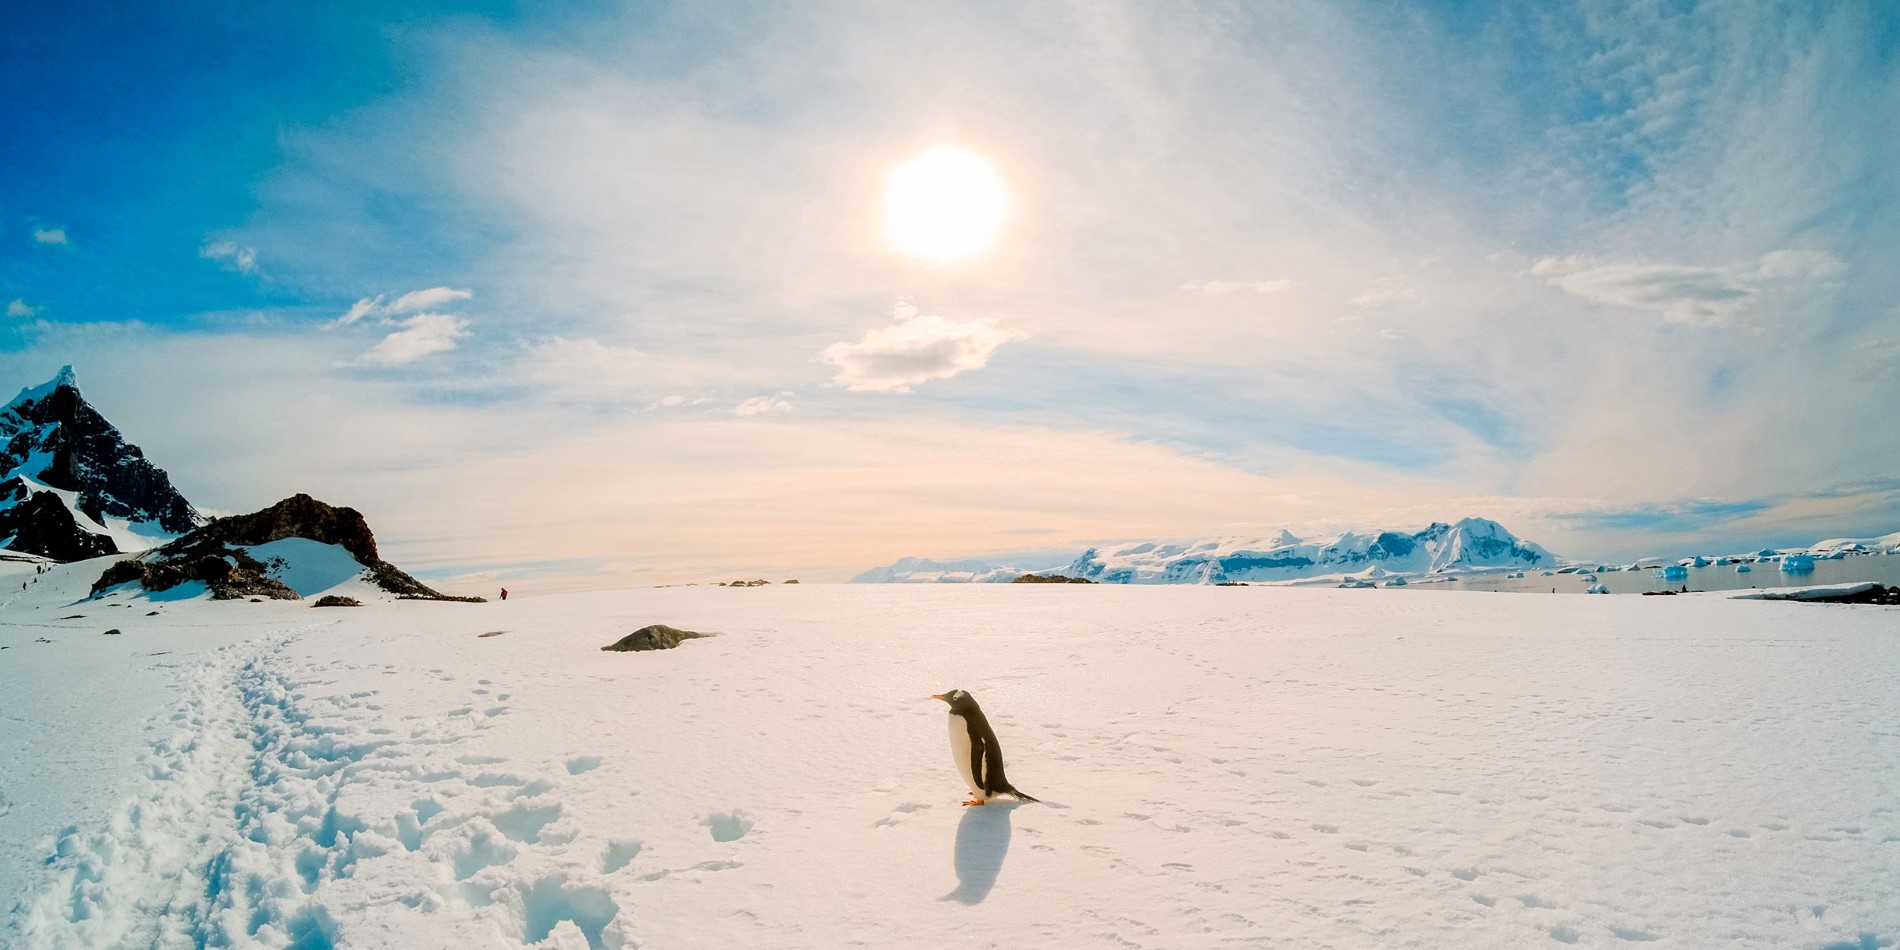 Penguin standing on snow, maountains to the left.